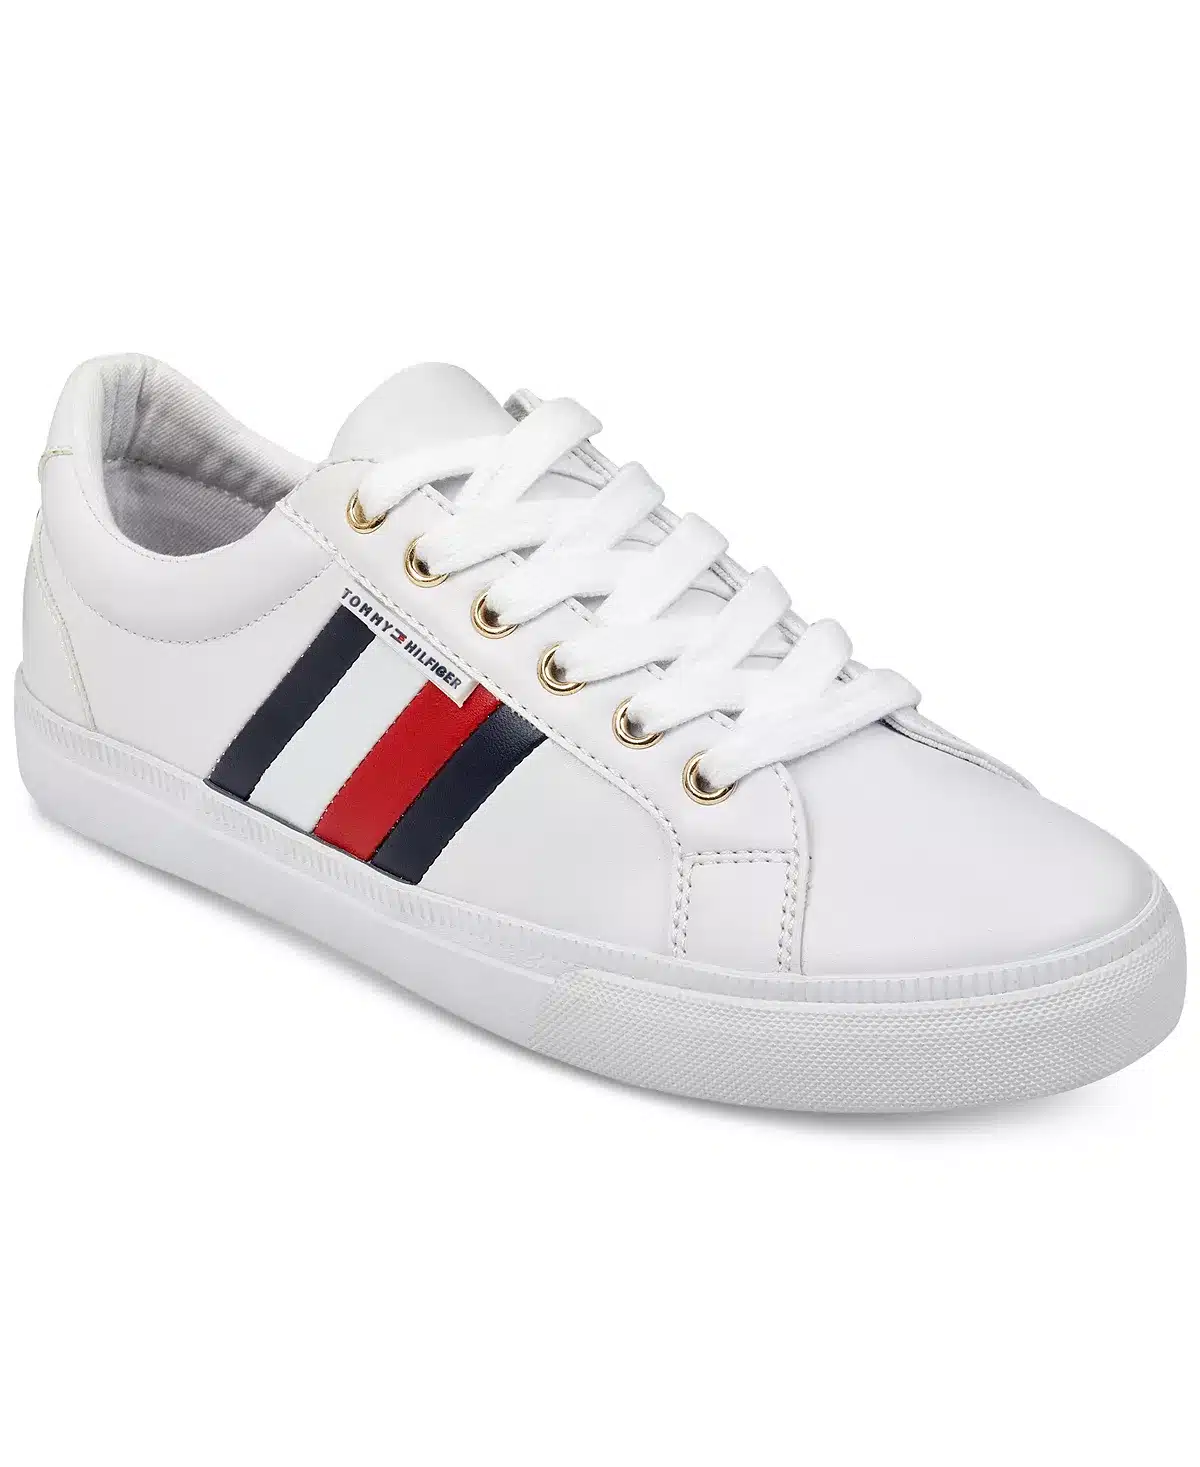 Tommy Hilfiger white Lightz sneaker with red, white, and blue stripes.